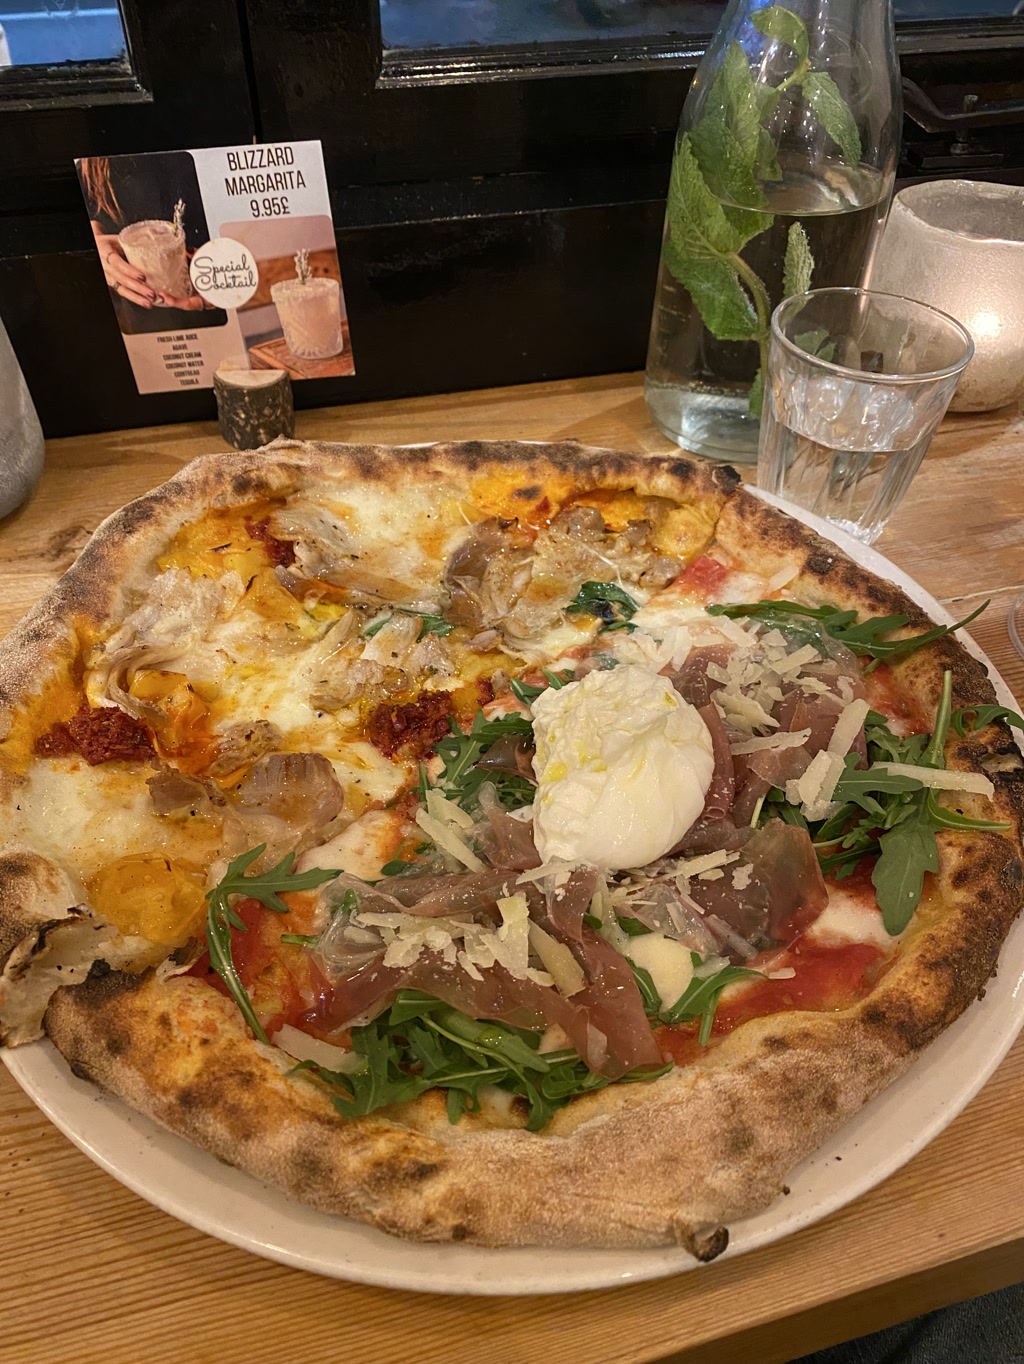 A freshly baked pizza is presented on a round white plate, exhibiting a golden-brown crust with char marks. The pizza is topped with a variety of colorful ingredients, including melted cheese spread unevenly across the surface, bright red tomato sauce visible in areas, vibrant green arugula, a few slices of what appears to be prosciutto, and dollops of yellow and red condiments that could be different types of flavored oils or sauces. Additionally, there is a visibly soft, poached egg on top with a-runny yolk. Set beside the pizza on the wood-finished table, there is a clear glass of water, a bottle of water with mint leaves inside, and a candle holder with a lit candle giving off a soft glow. A promotional card for a 'Blizzard Margarita' is propped up against the window, suggesting the venue might be a restaurant or cafe with a focus on Italian cuisine or a selection of specialty drinks.